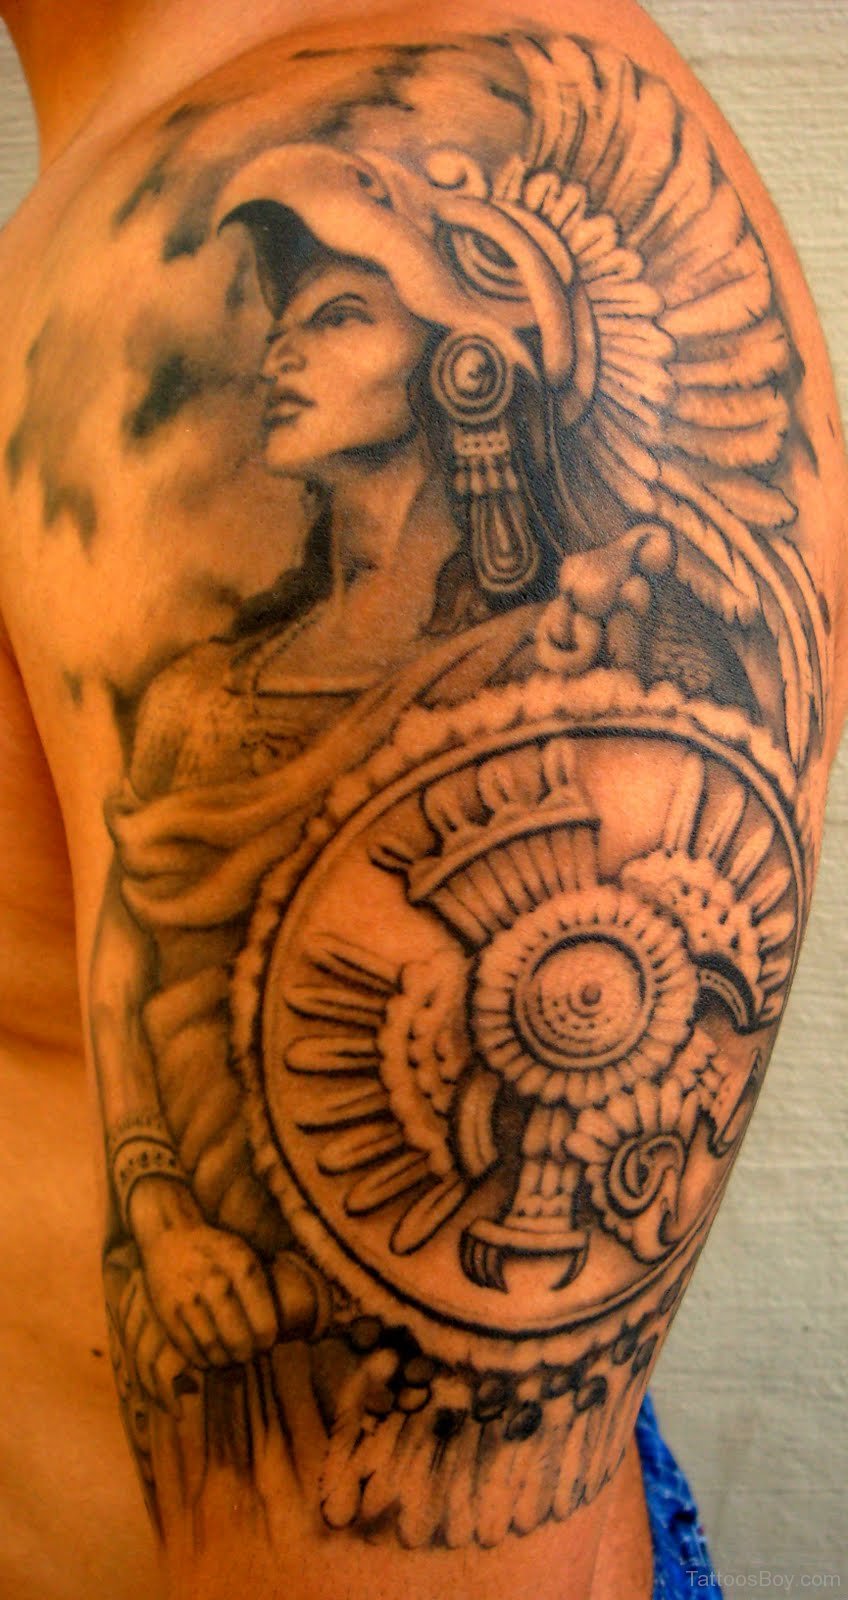 Aztec Tattoos | Tattoo Designs, Tattoo Pictures | Page 4